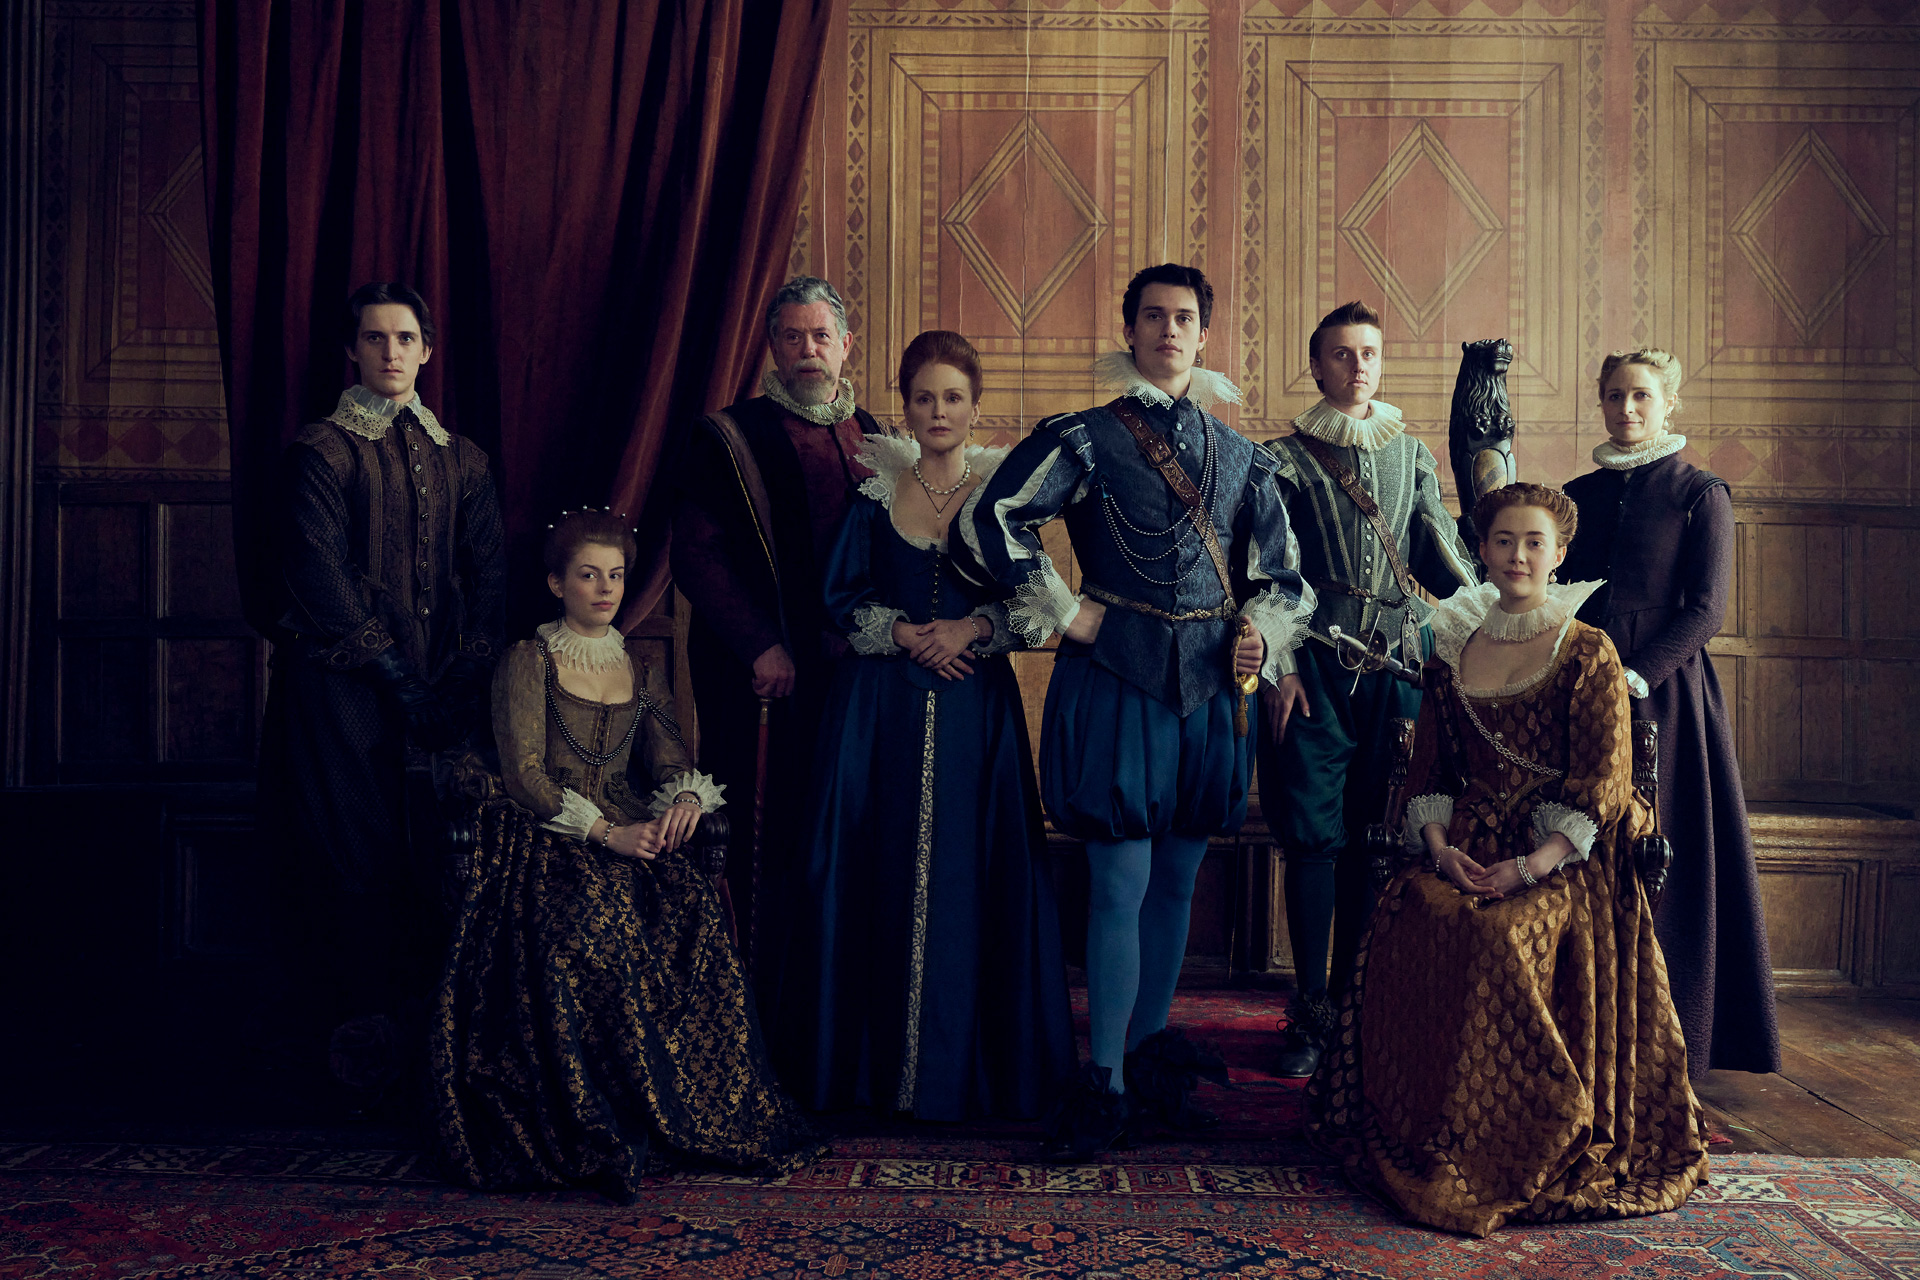 Cast of Mary & George in Jacobean costumes